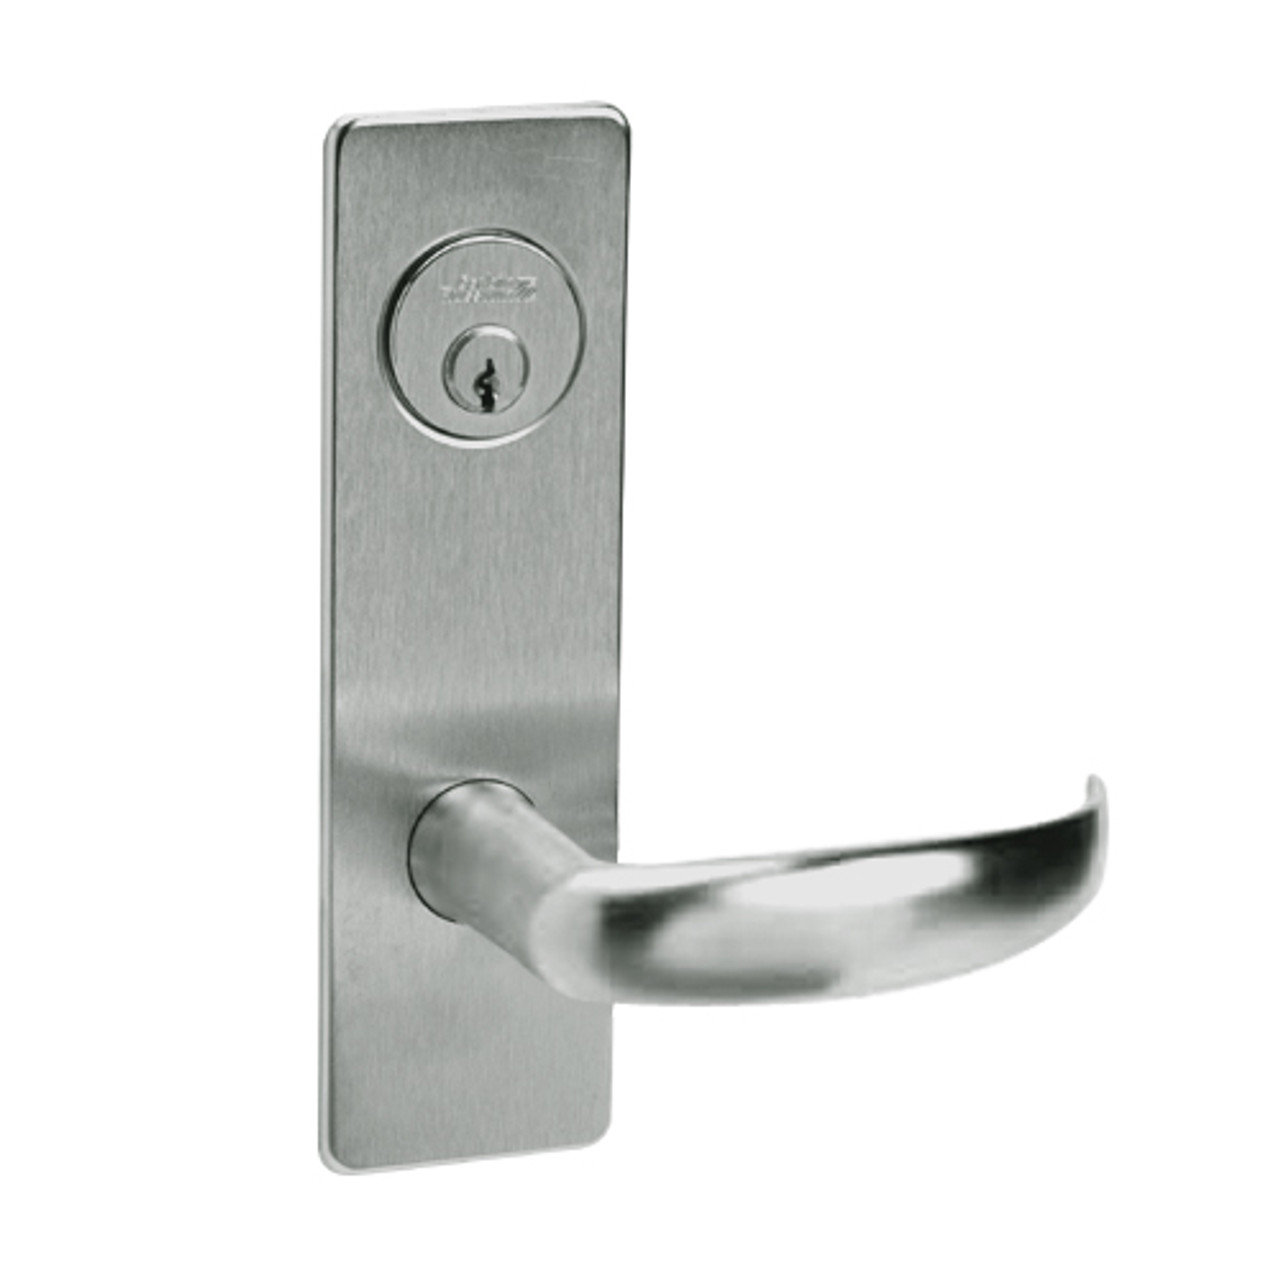 ML2067-PSR-619 Corbin Russwin ML2000 Series Mortise Apartment Locksets with Princeton Lever and Deadbolt in Satin Nickel